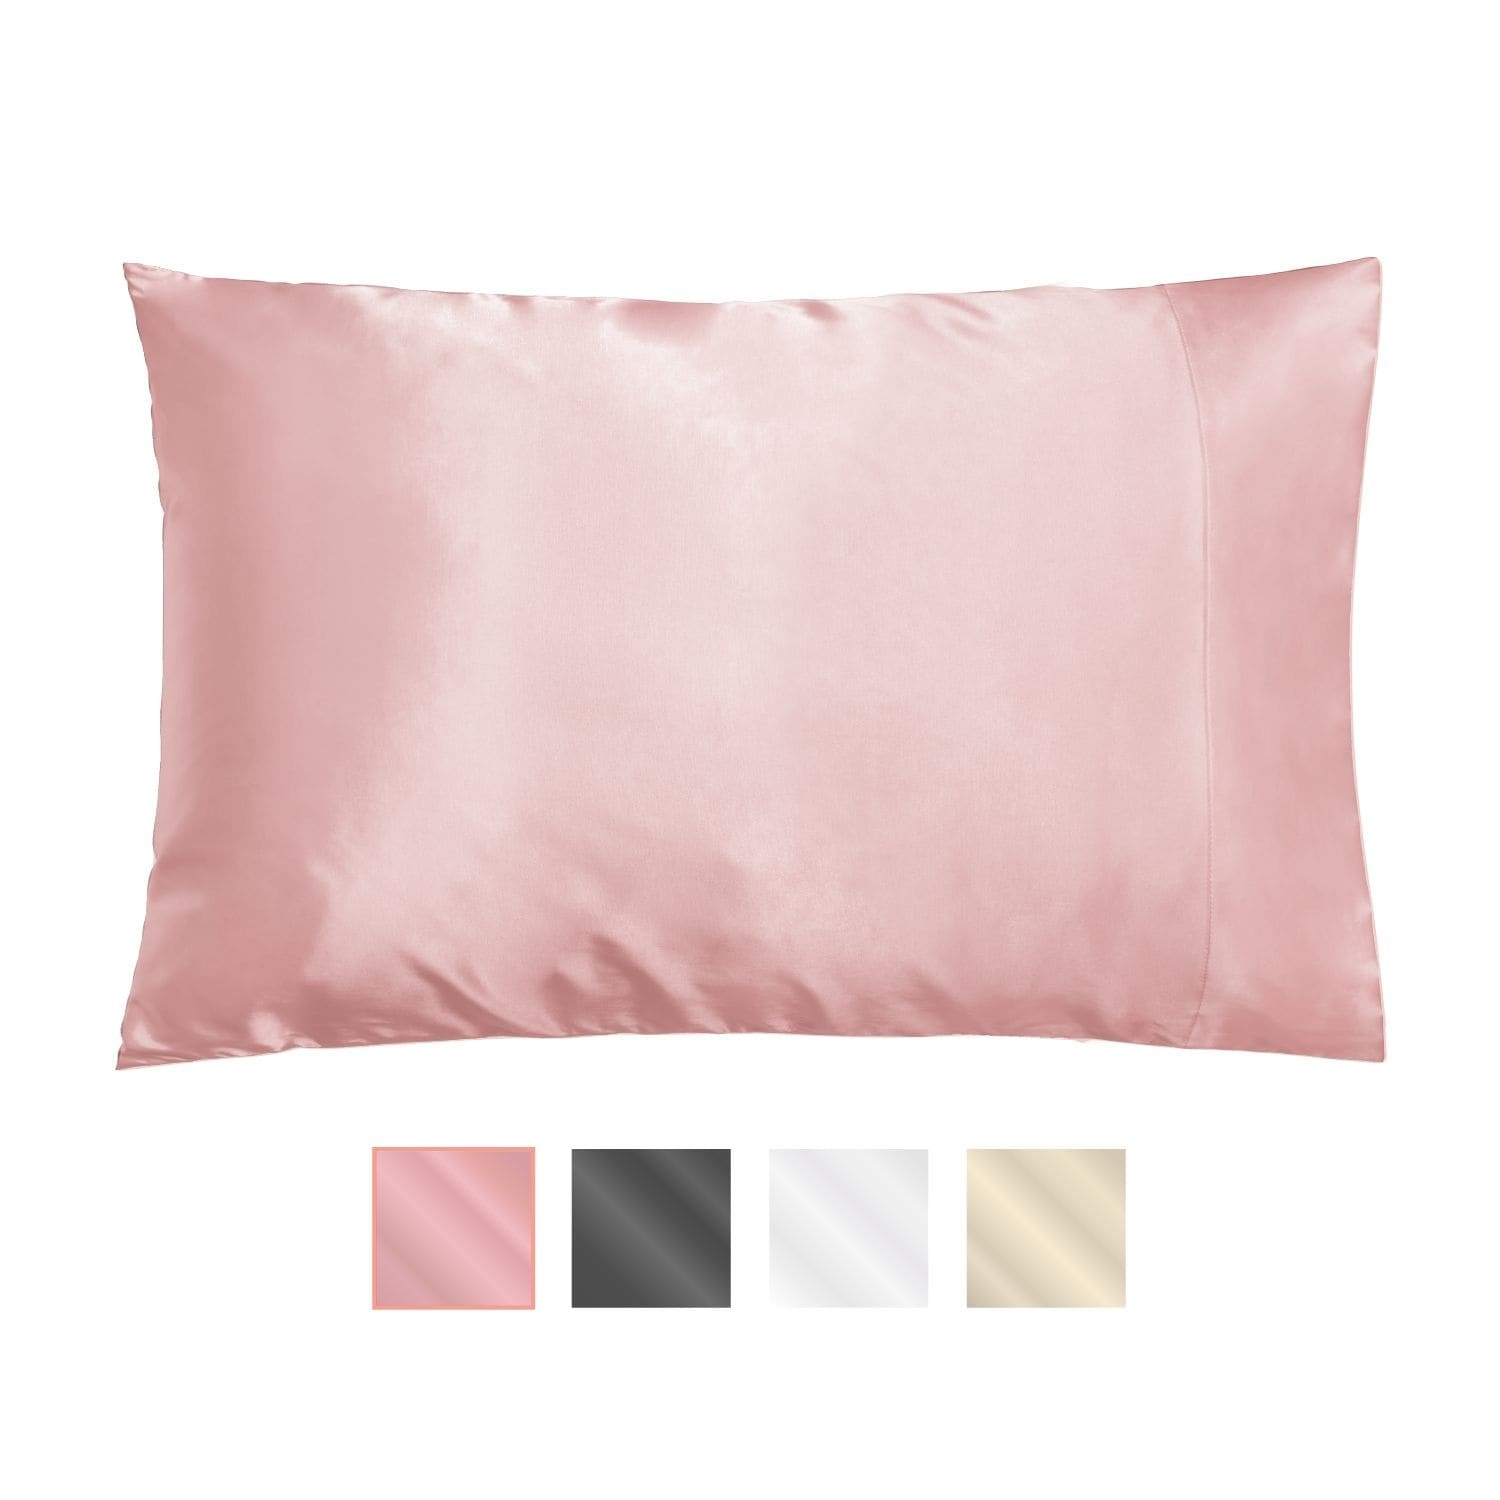 https://ak1.ostkcdn.com/images/products/is/images/direct/a380e6bd9fc4fbba7d0f702802026bbe02a0ddd9/NIGHT-Satin-Pillowcase-for-Skin-%26-Hair---Super-Soft-Pillow-Covers.jpg